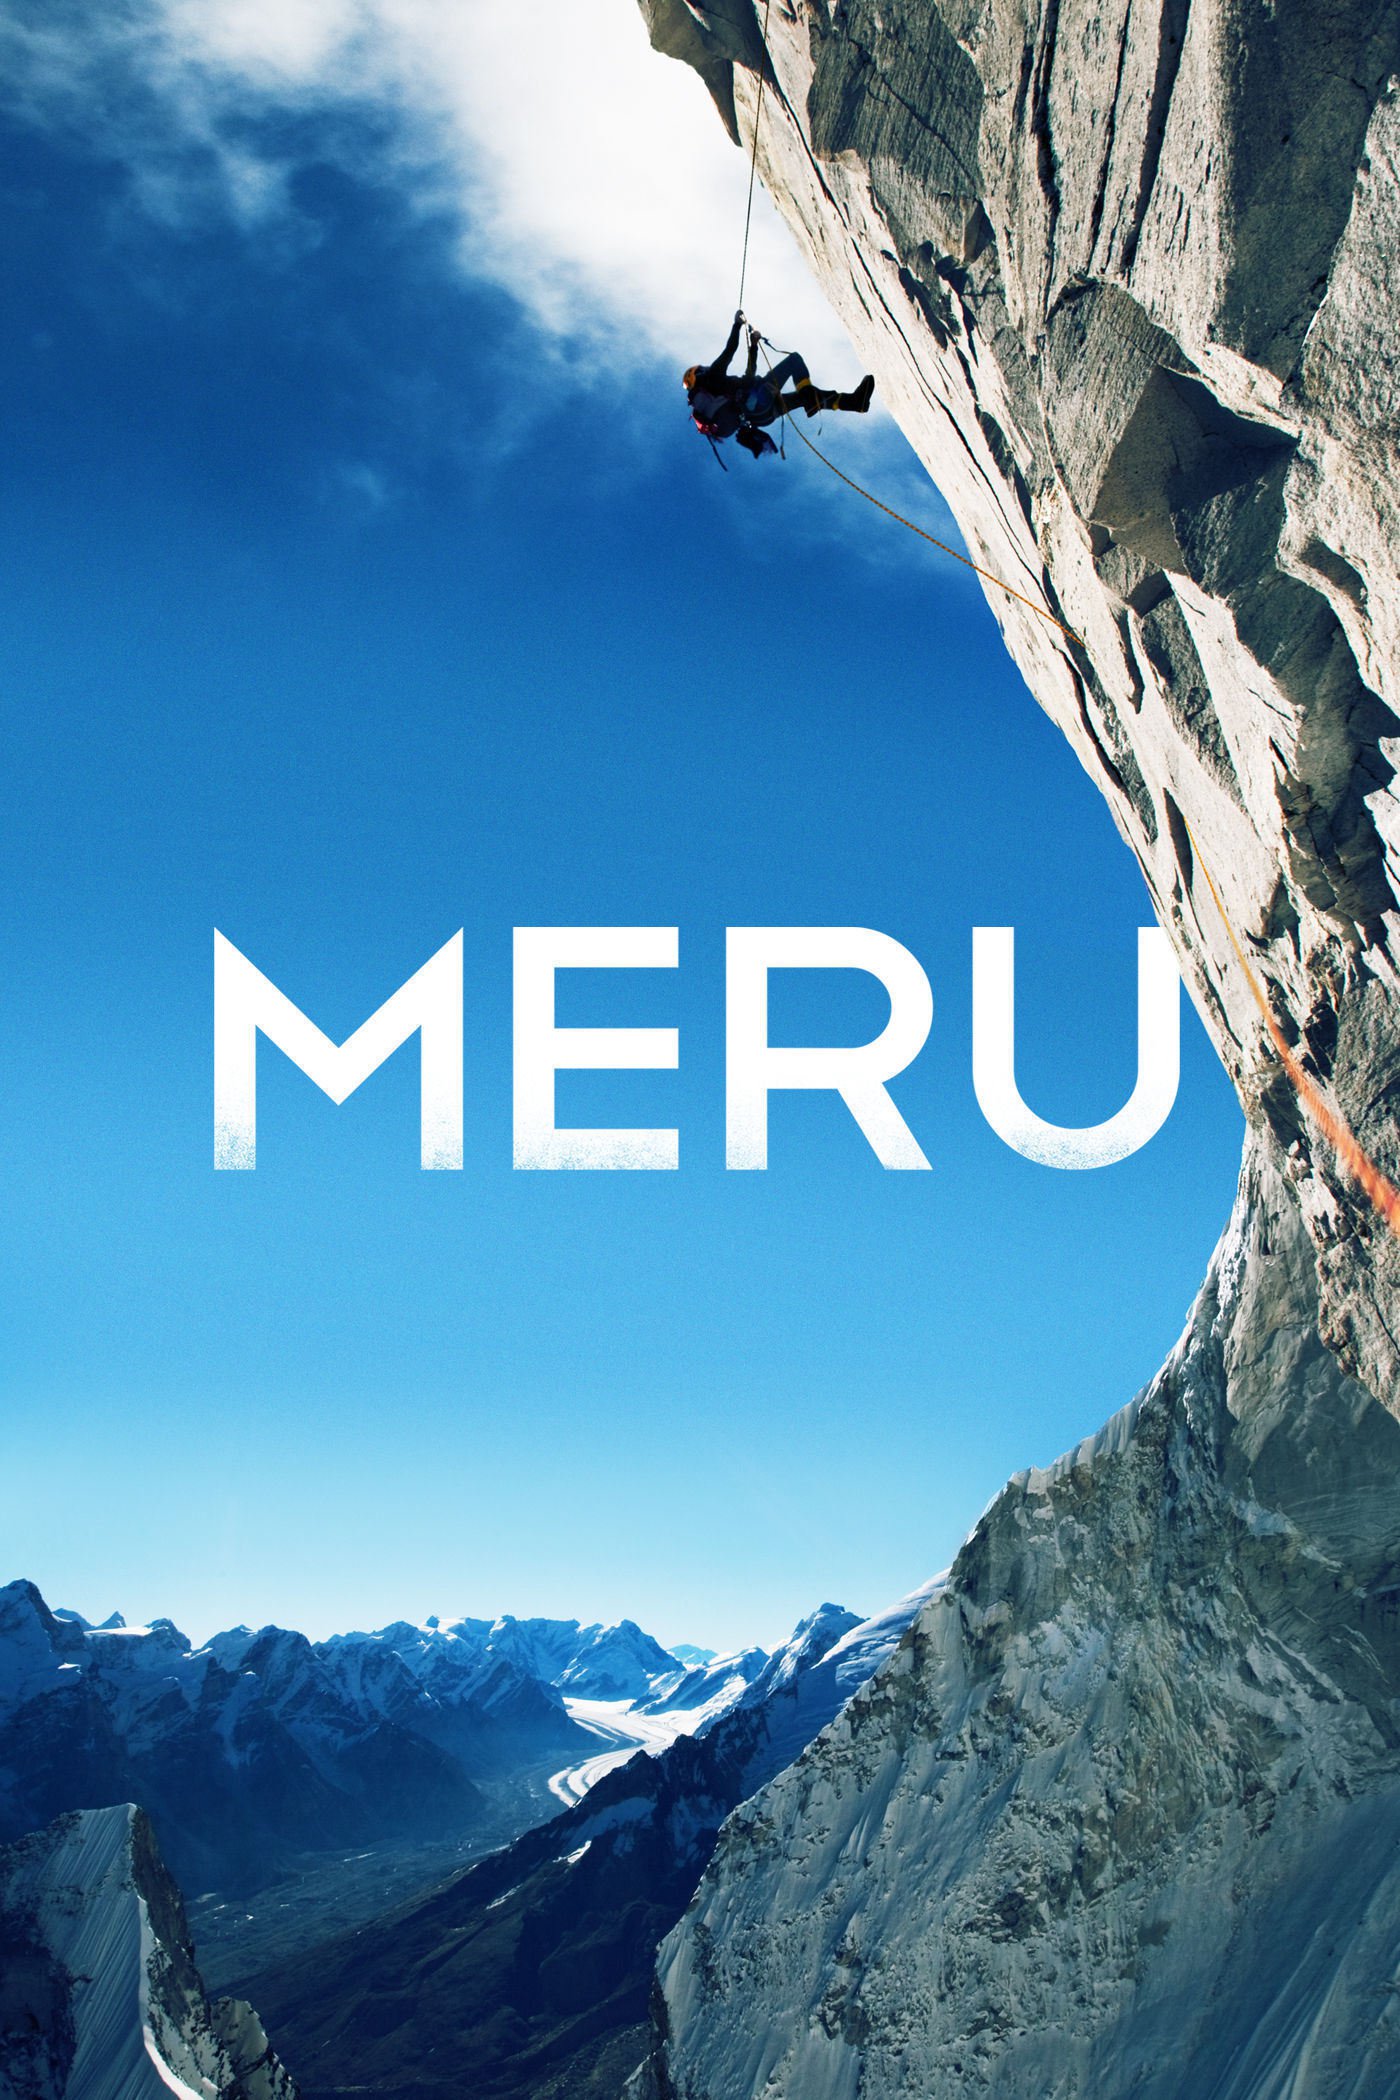 Poster for the movie "Meru"